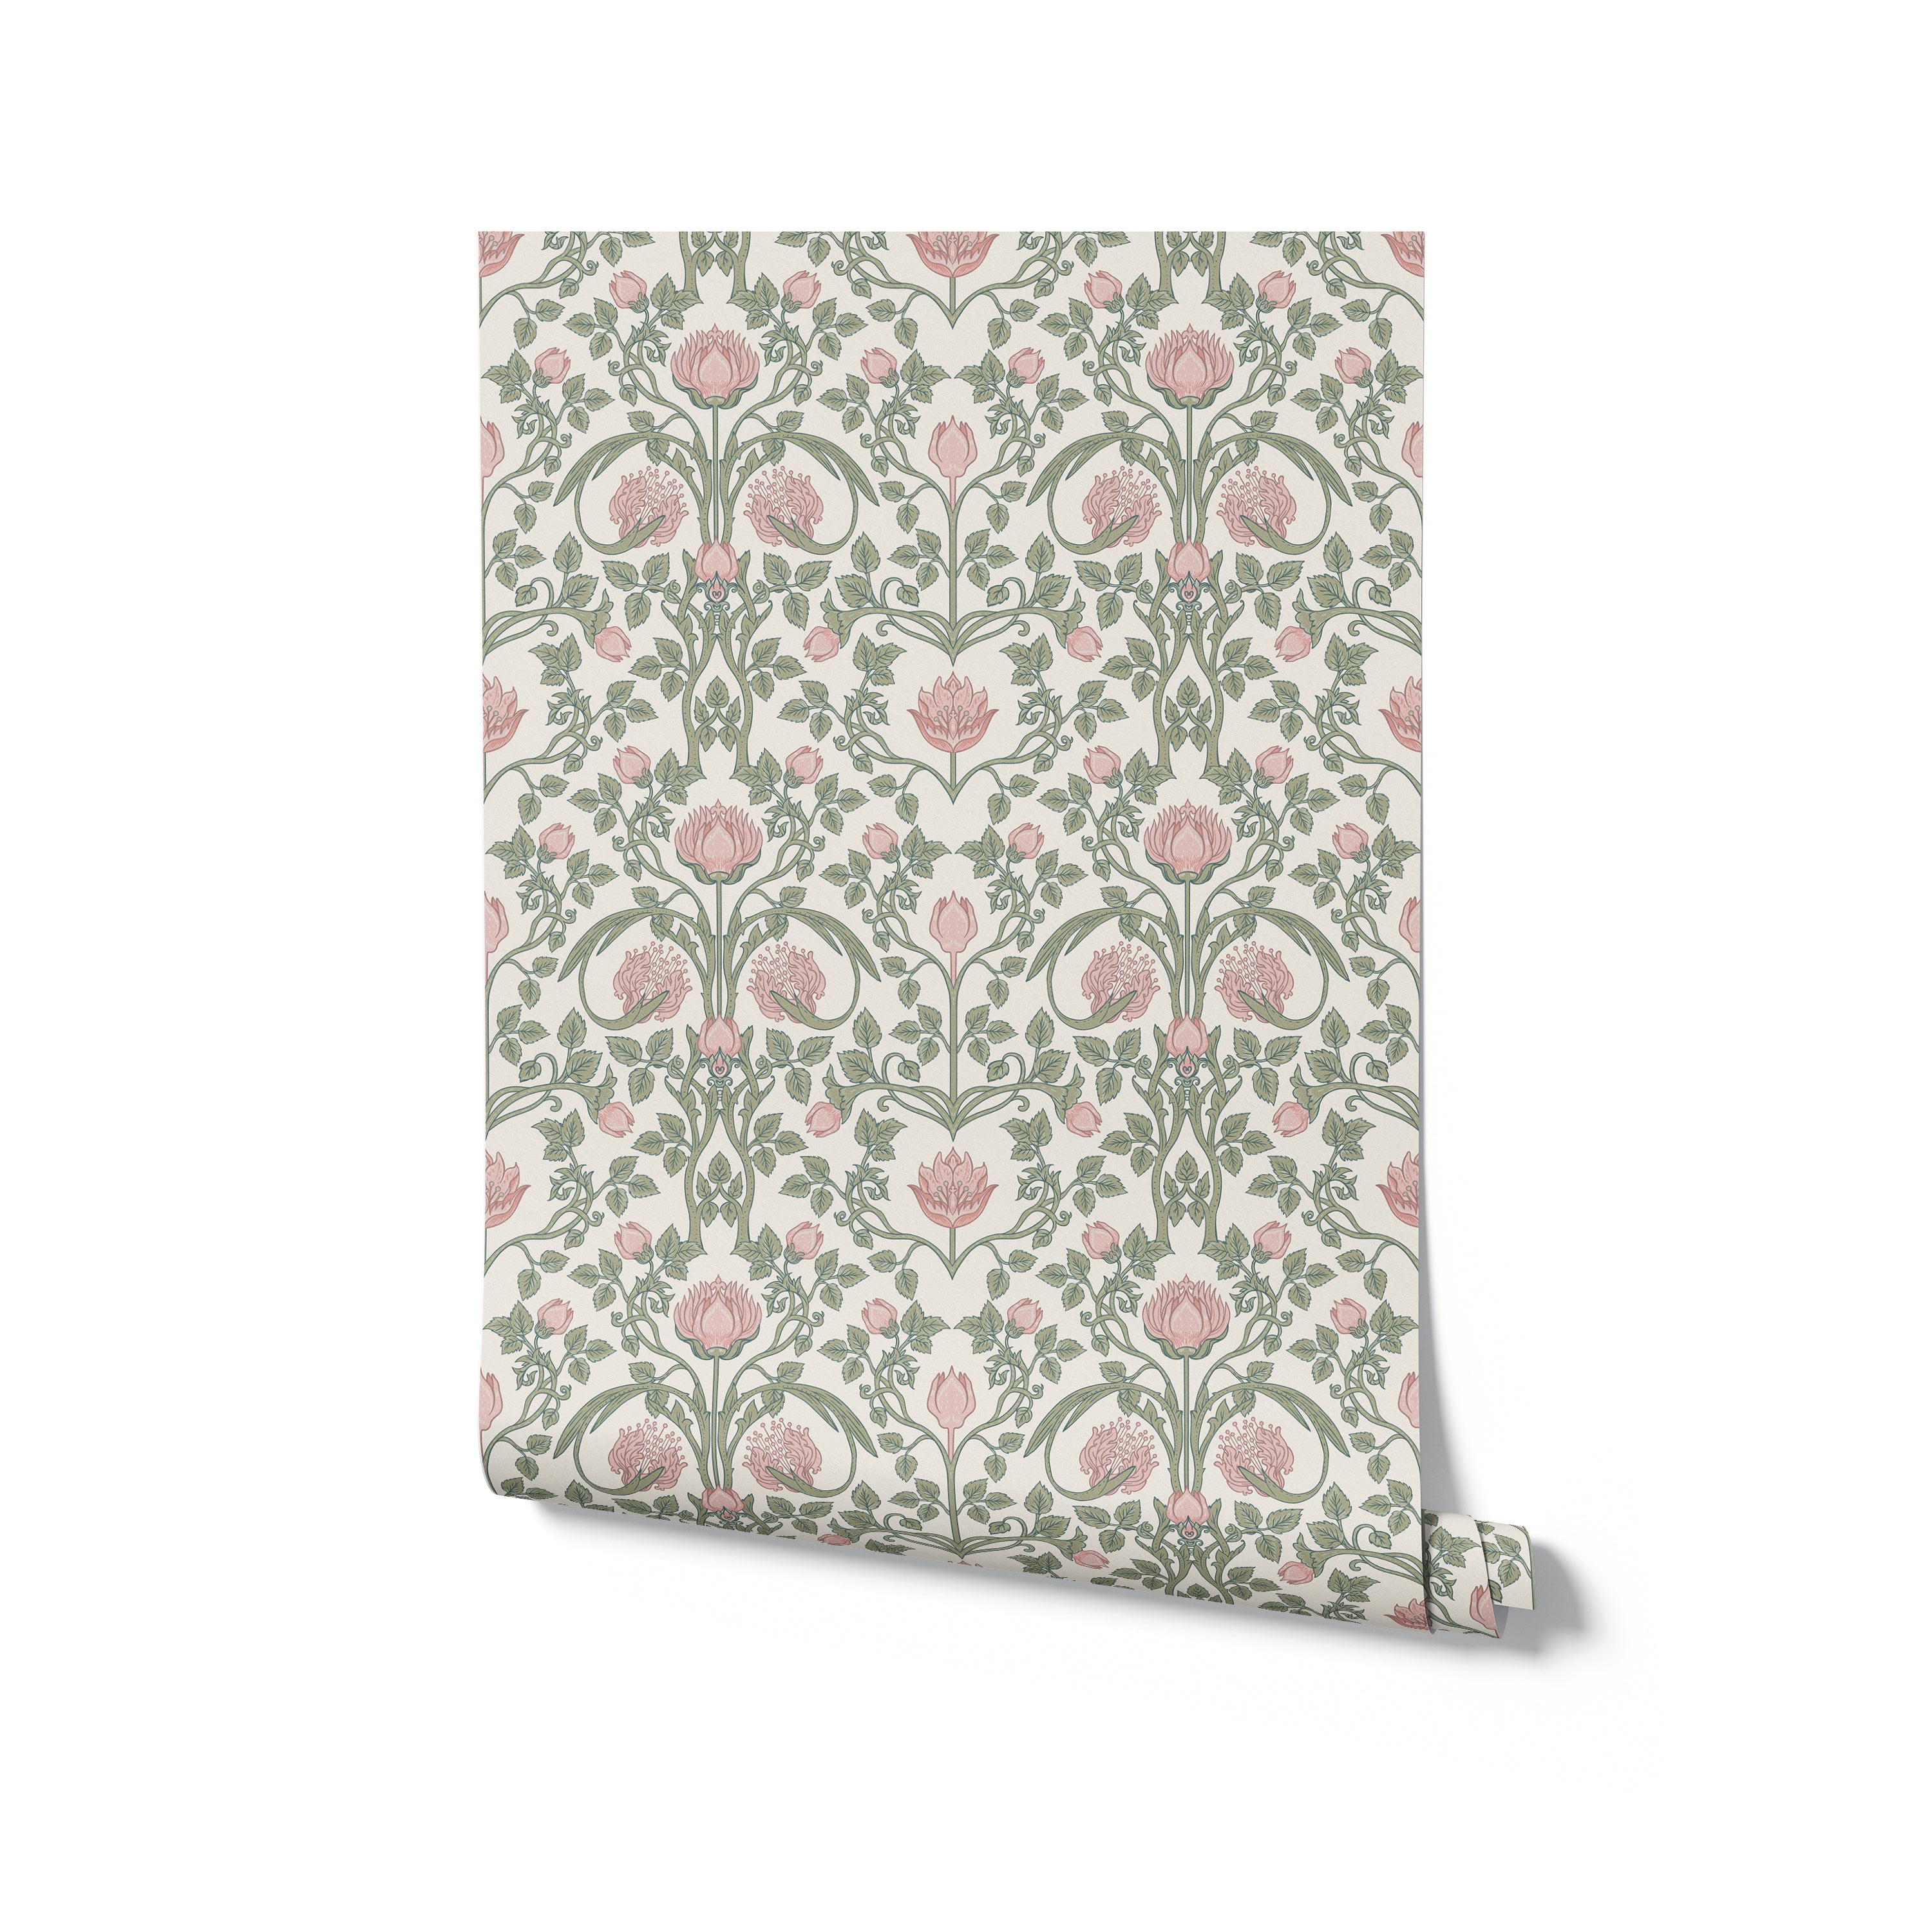 A rolled-up sample of pastel floral damask wallpaper shows off its intricate design of soft pink flowers and green leaves, ready to beautify a room